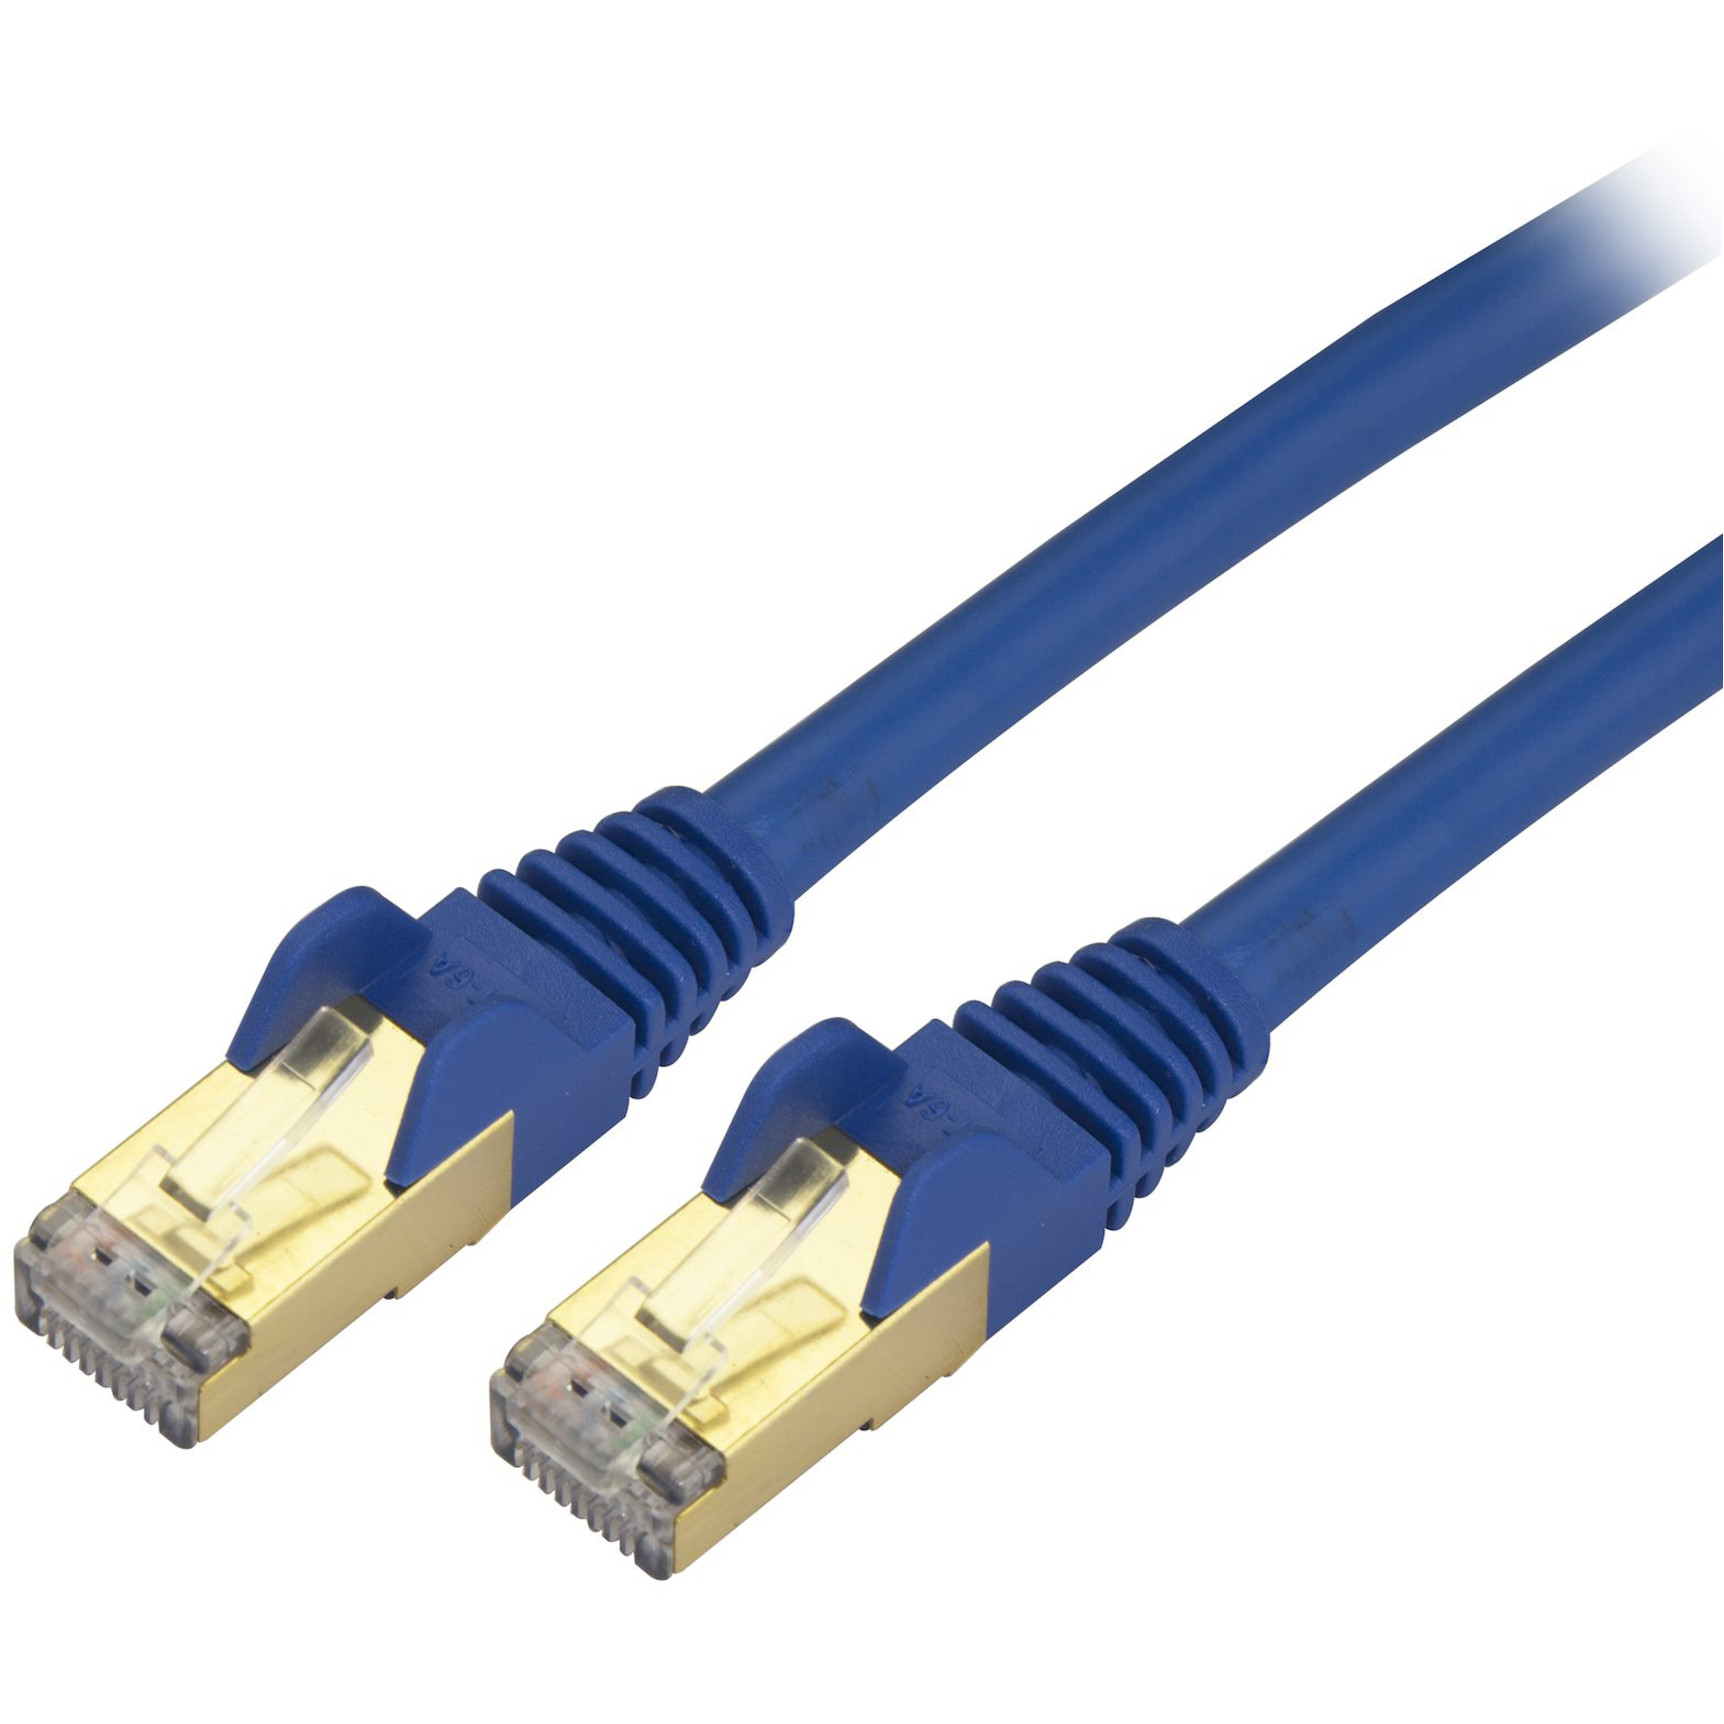 Startech .com 30ft CAT6a Ethernet Cable10 Gigabit Category 6a Shielded Snagless 100W PoE Patch Cord10GbE Blue UL Certified Wiring/TIA -… C6ASPAT30BL